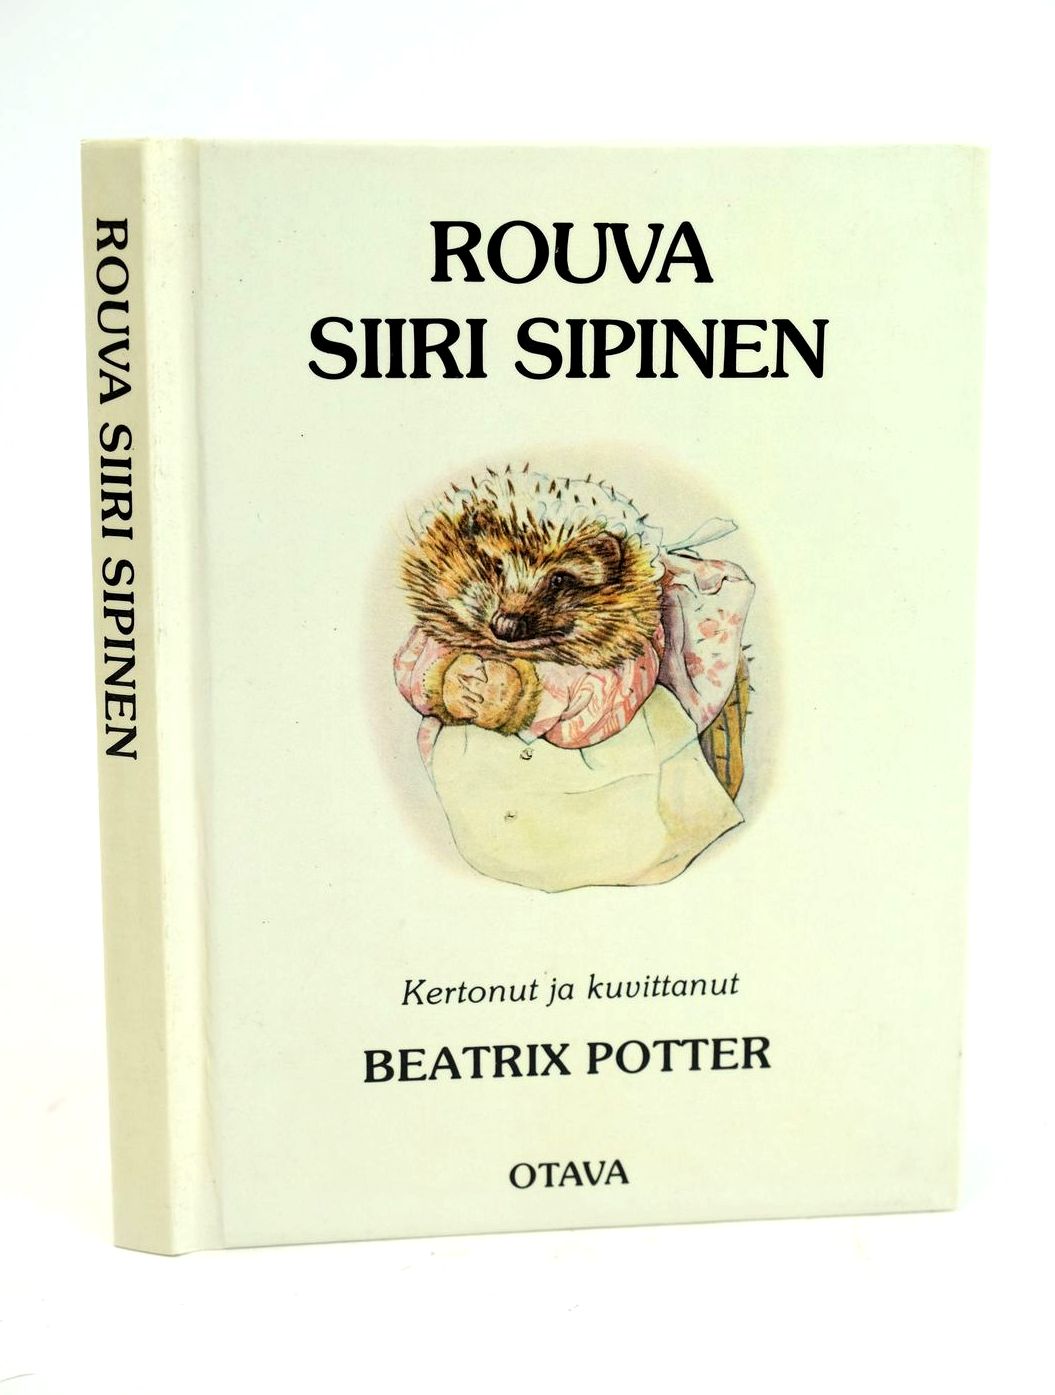 Photo of ROUVA SIIRI SIPINEN written by Potter, Beatrix illustrated by Potter, Beatrix published by Otava (STOCK CODE: 1318600)  for sale by Stella & Rose's Books